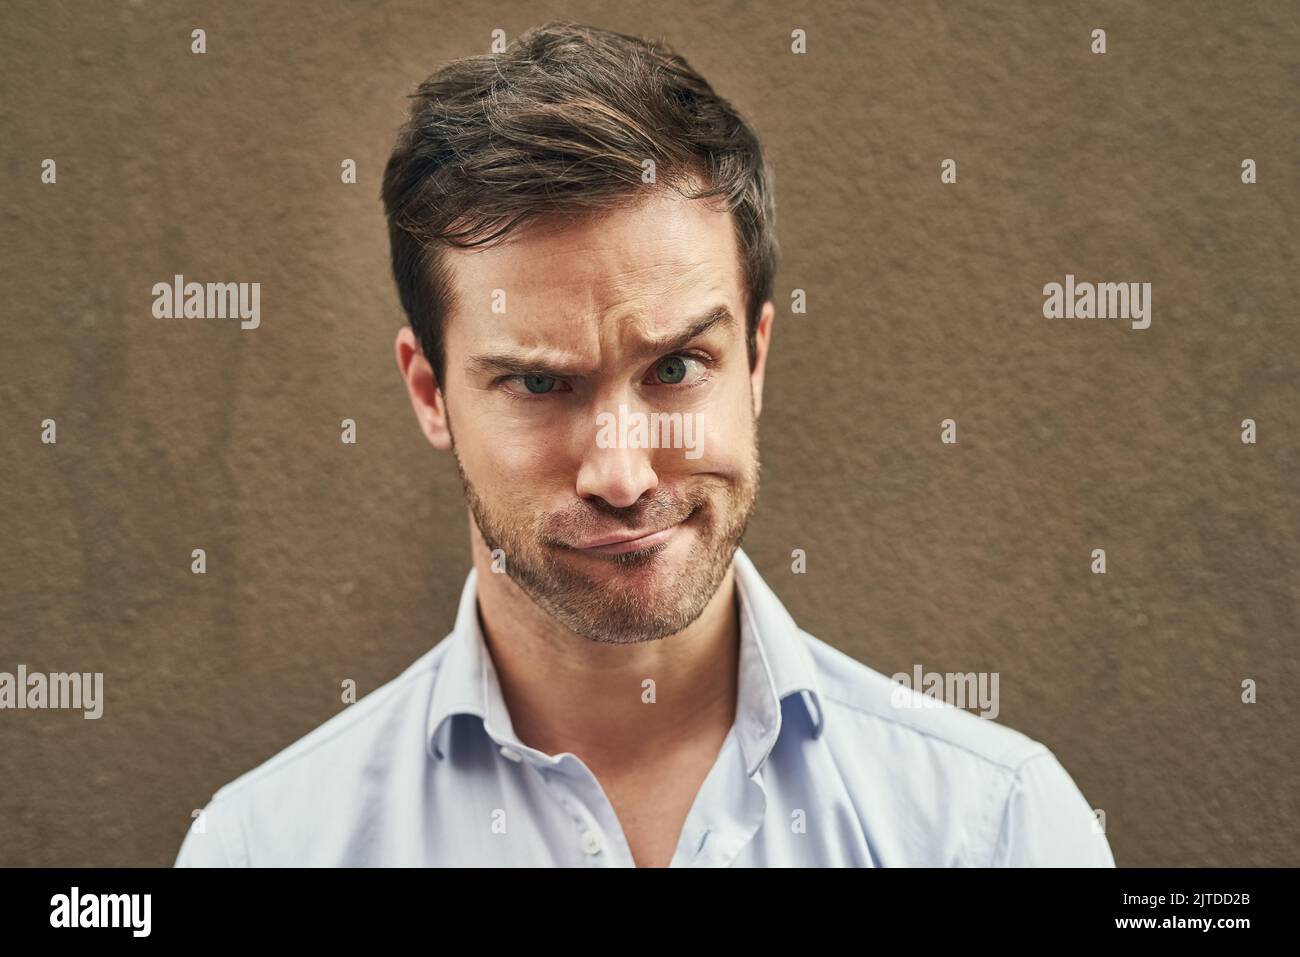 Goofing around. Portrait of a young man pulling a funny face against a dark background. Stock Photo